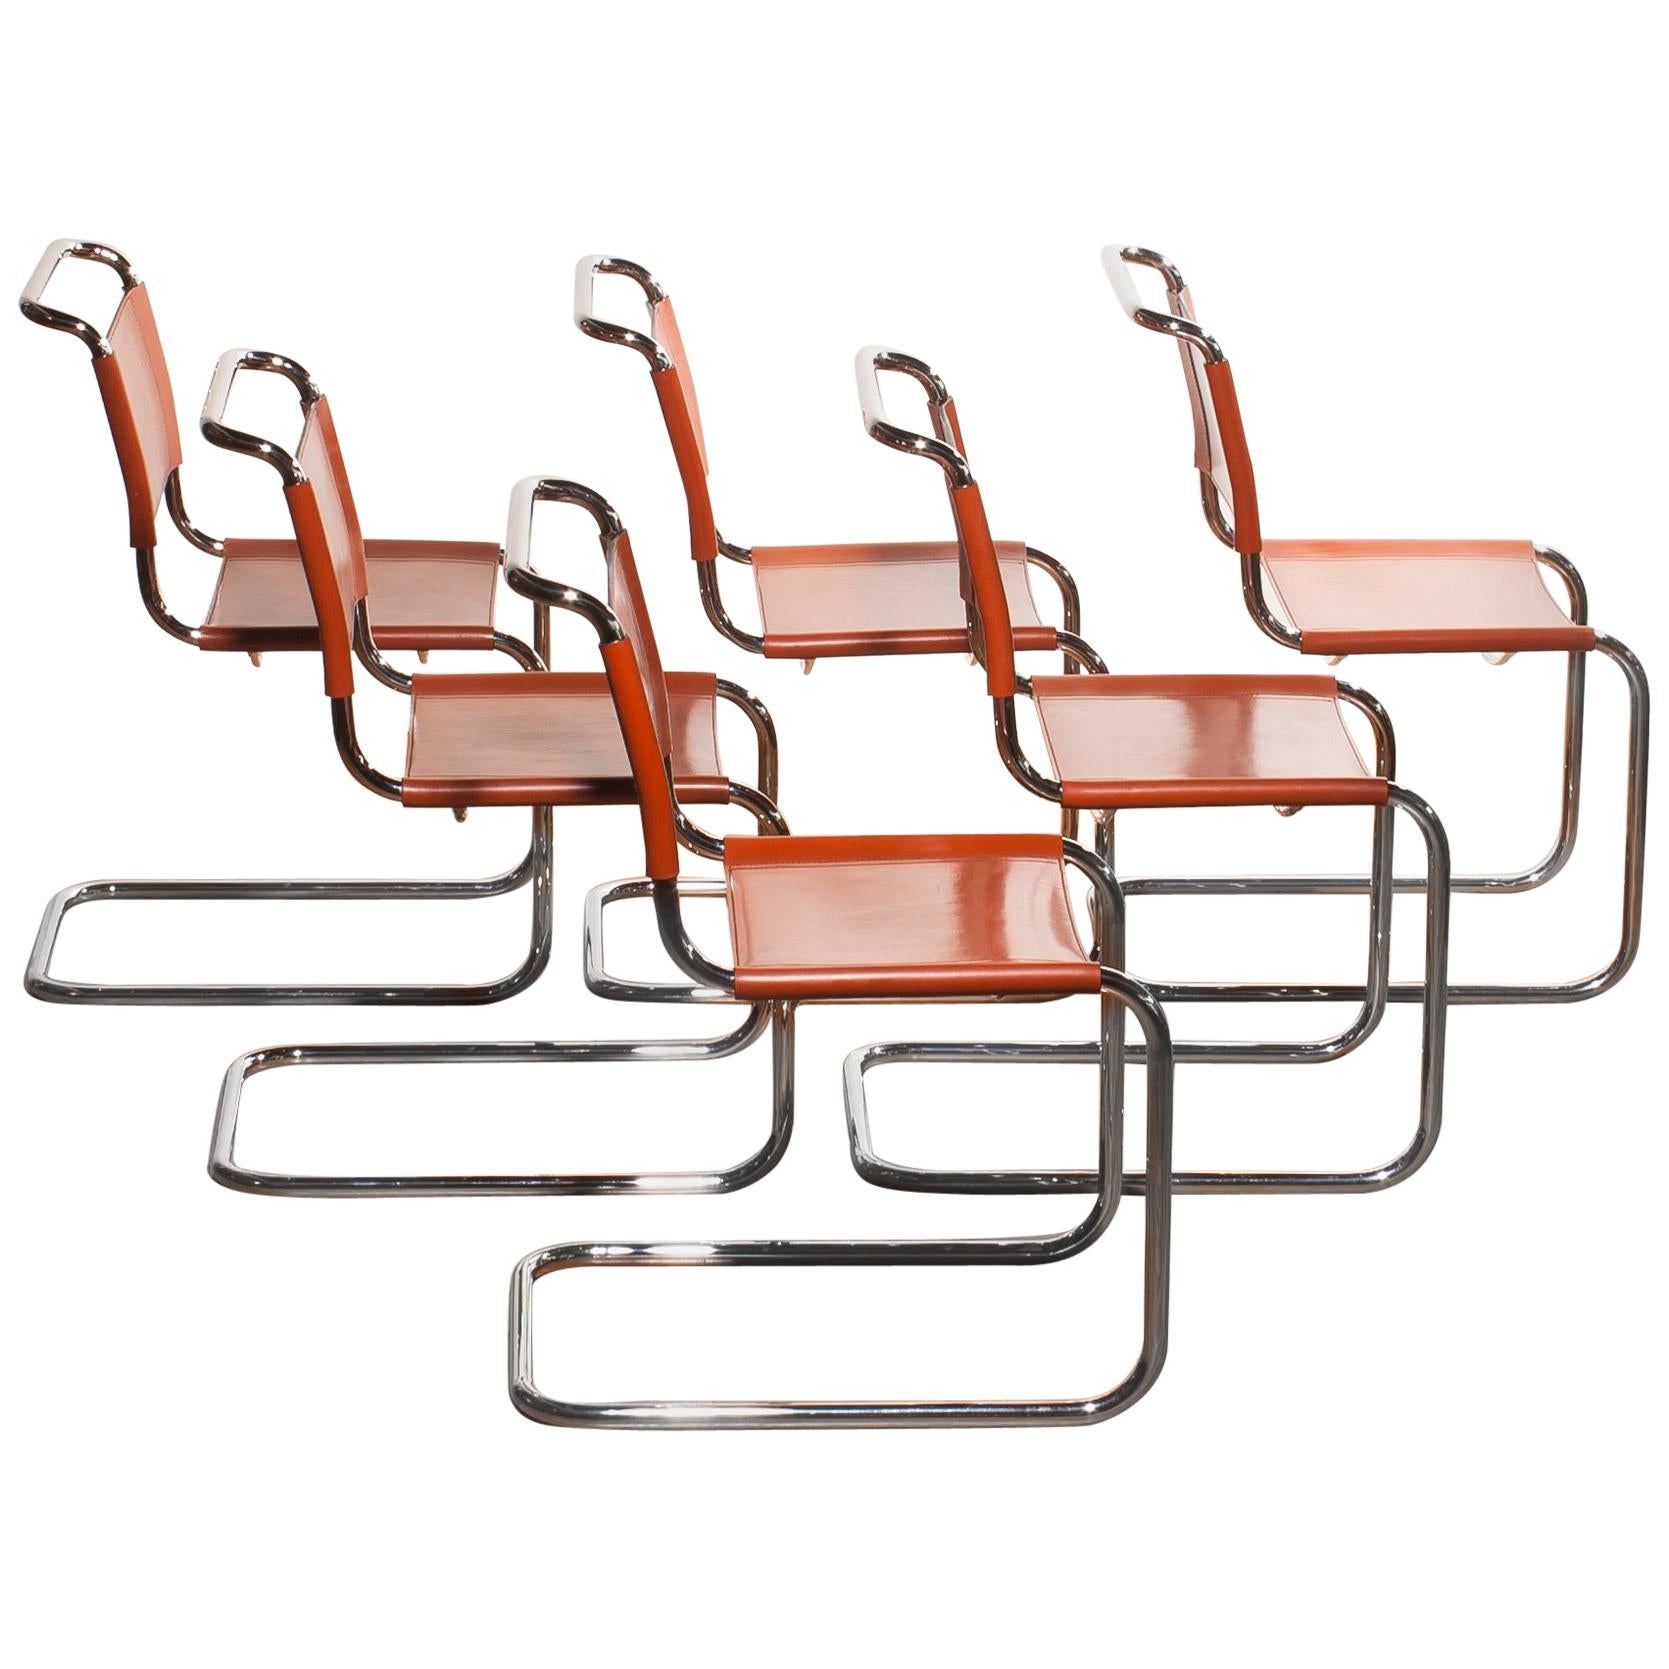 Chrome Set of Six Tubular Dining Chairs by Mart Stam for Fasem in Cognac Leather